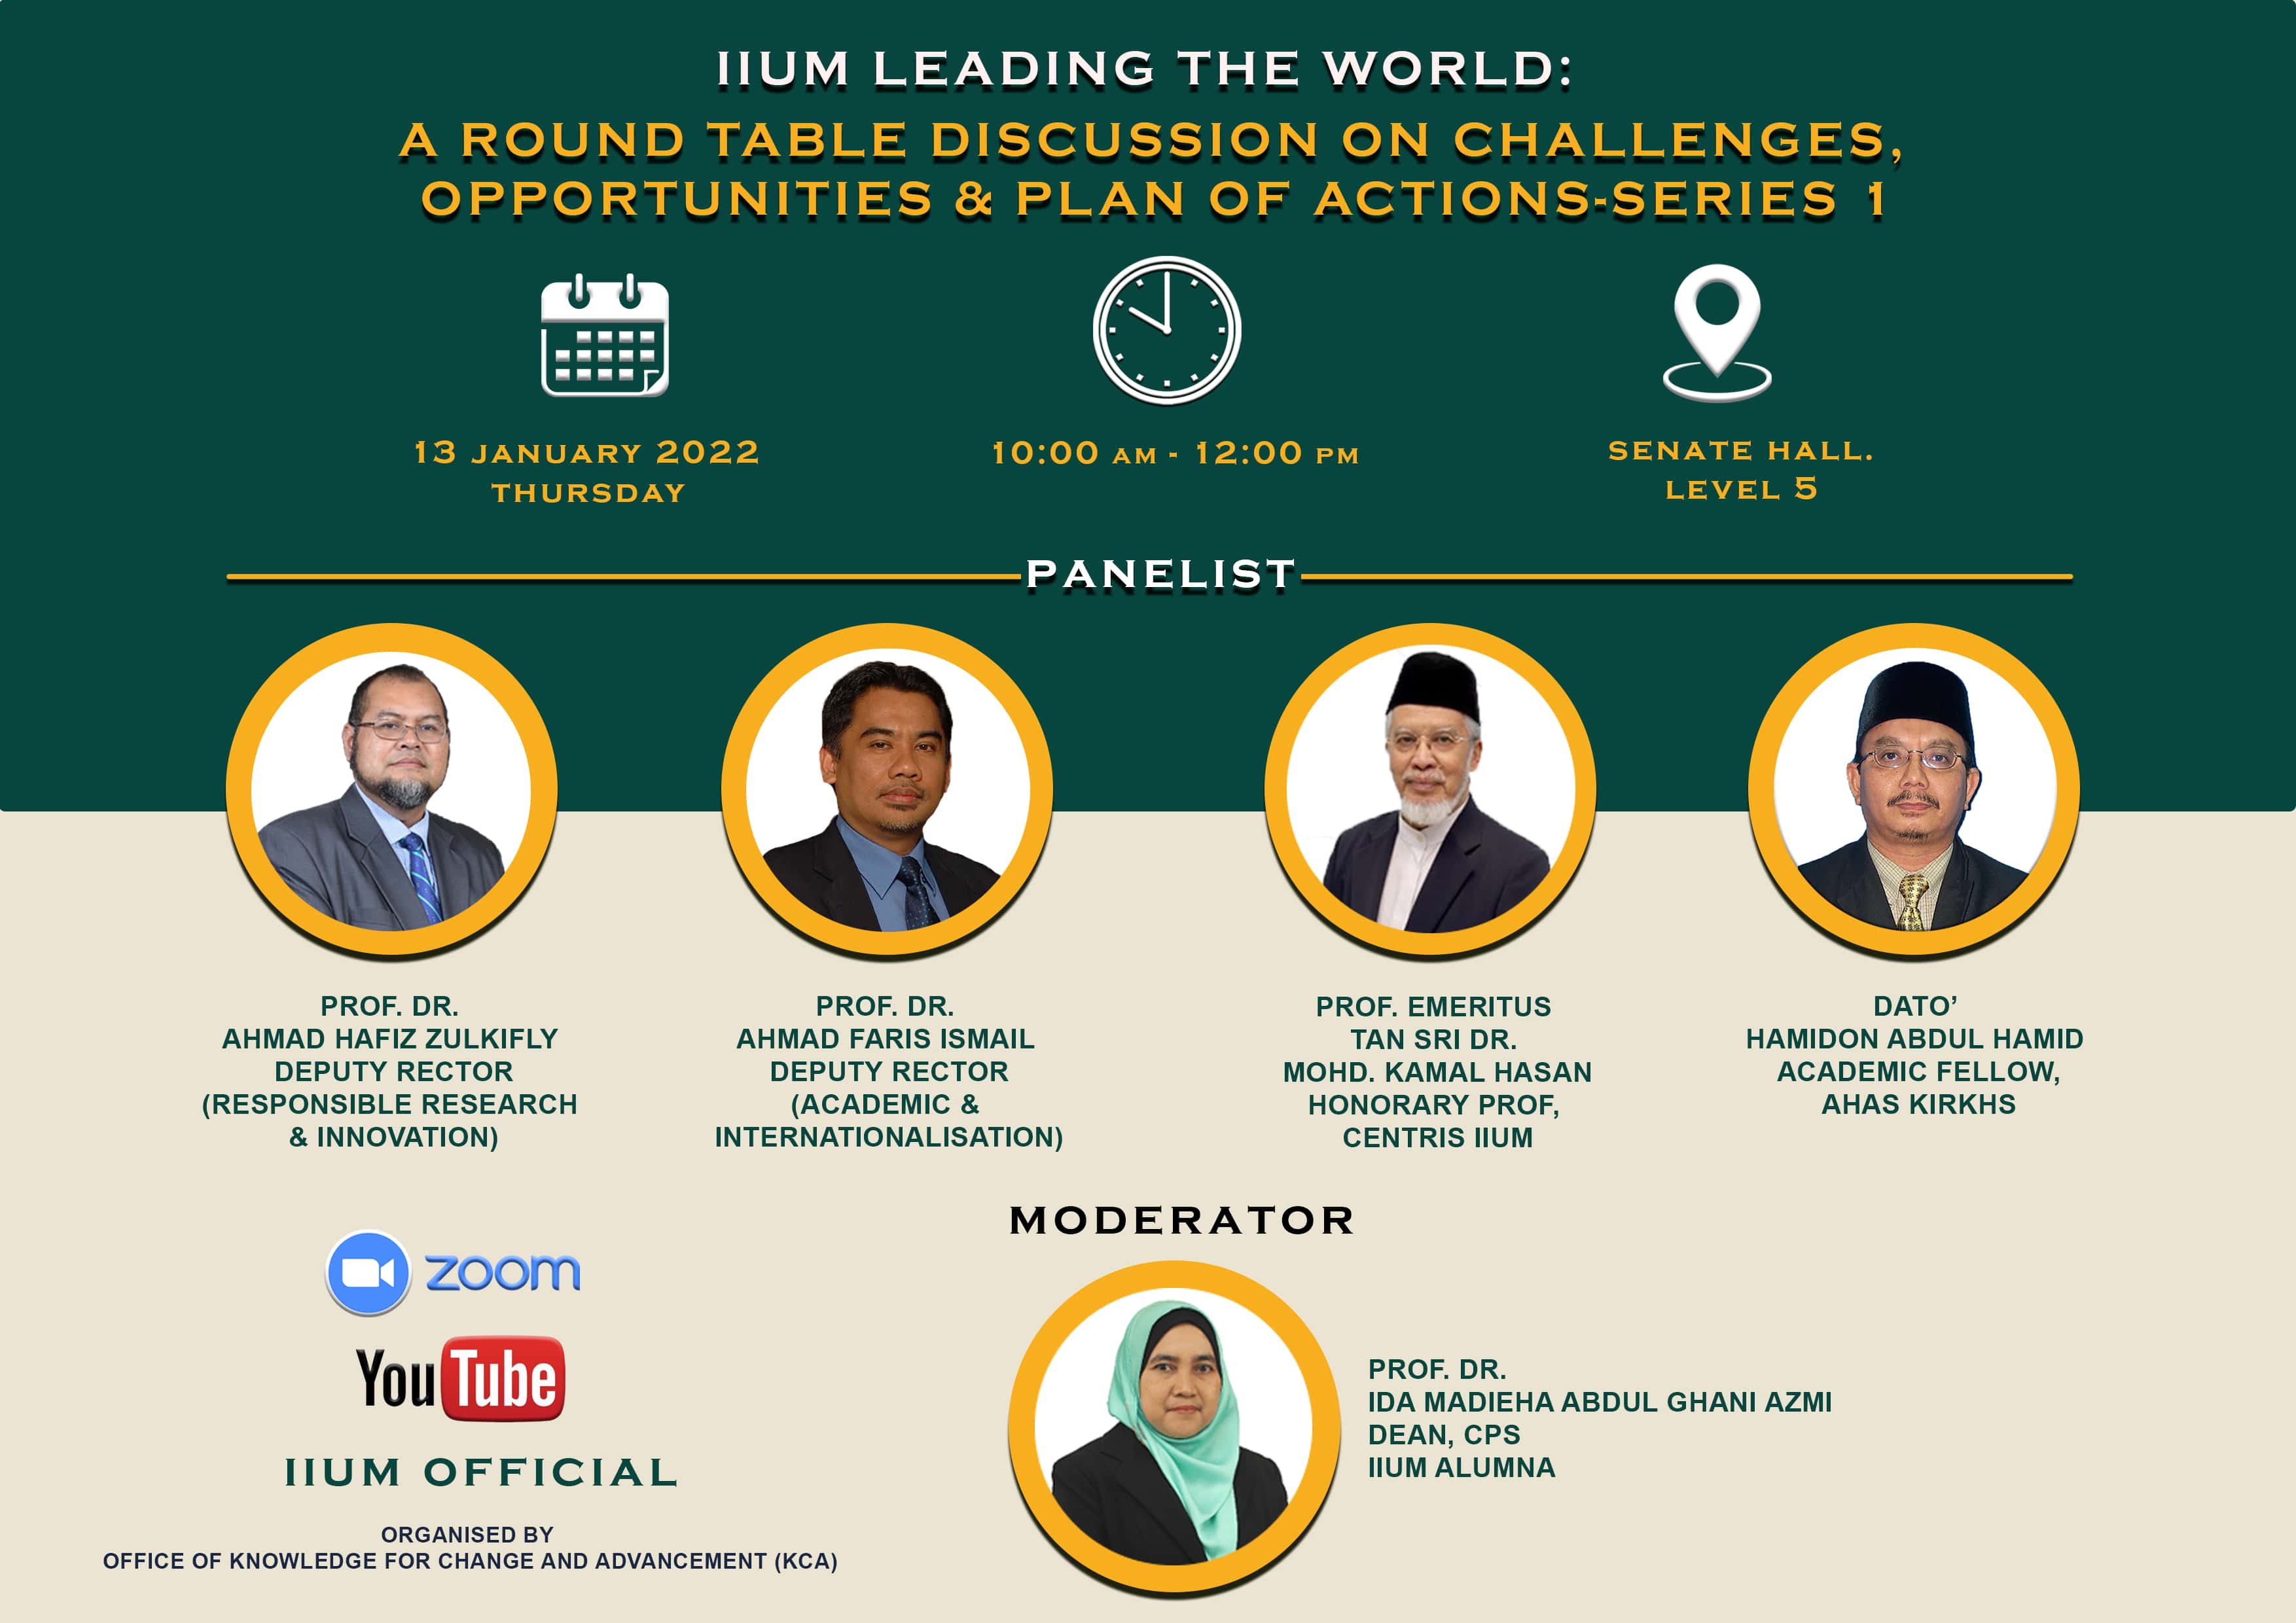 IIUM Leading the World: A Round Table Discussion on Challenges, Opportunities and Plan of Action - Series 1